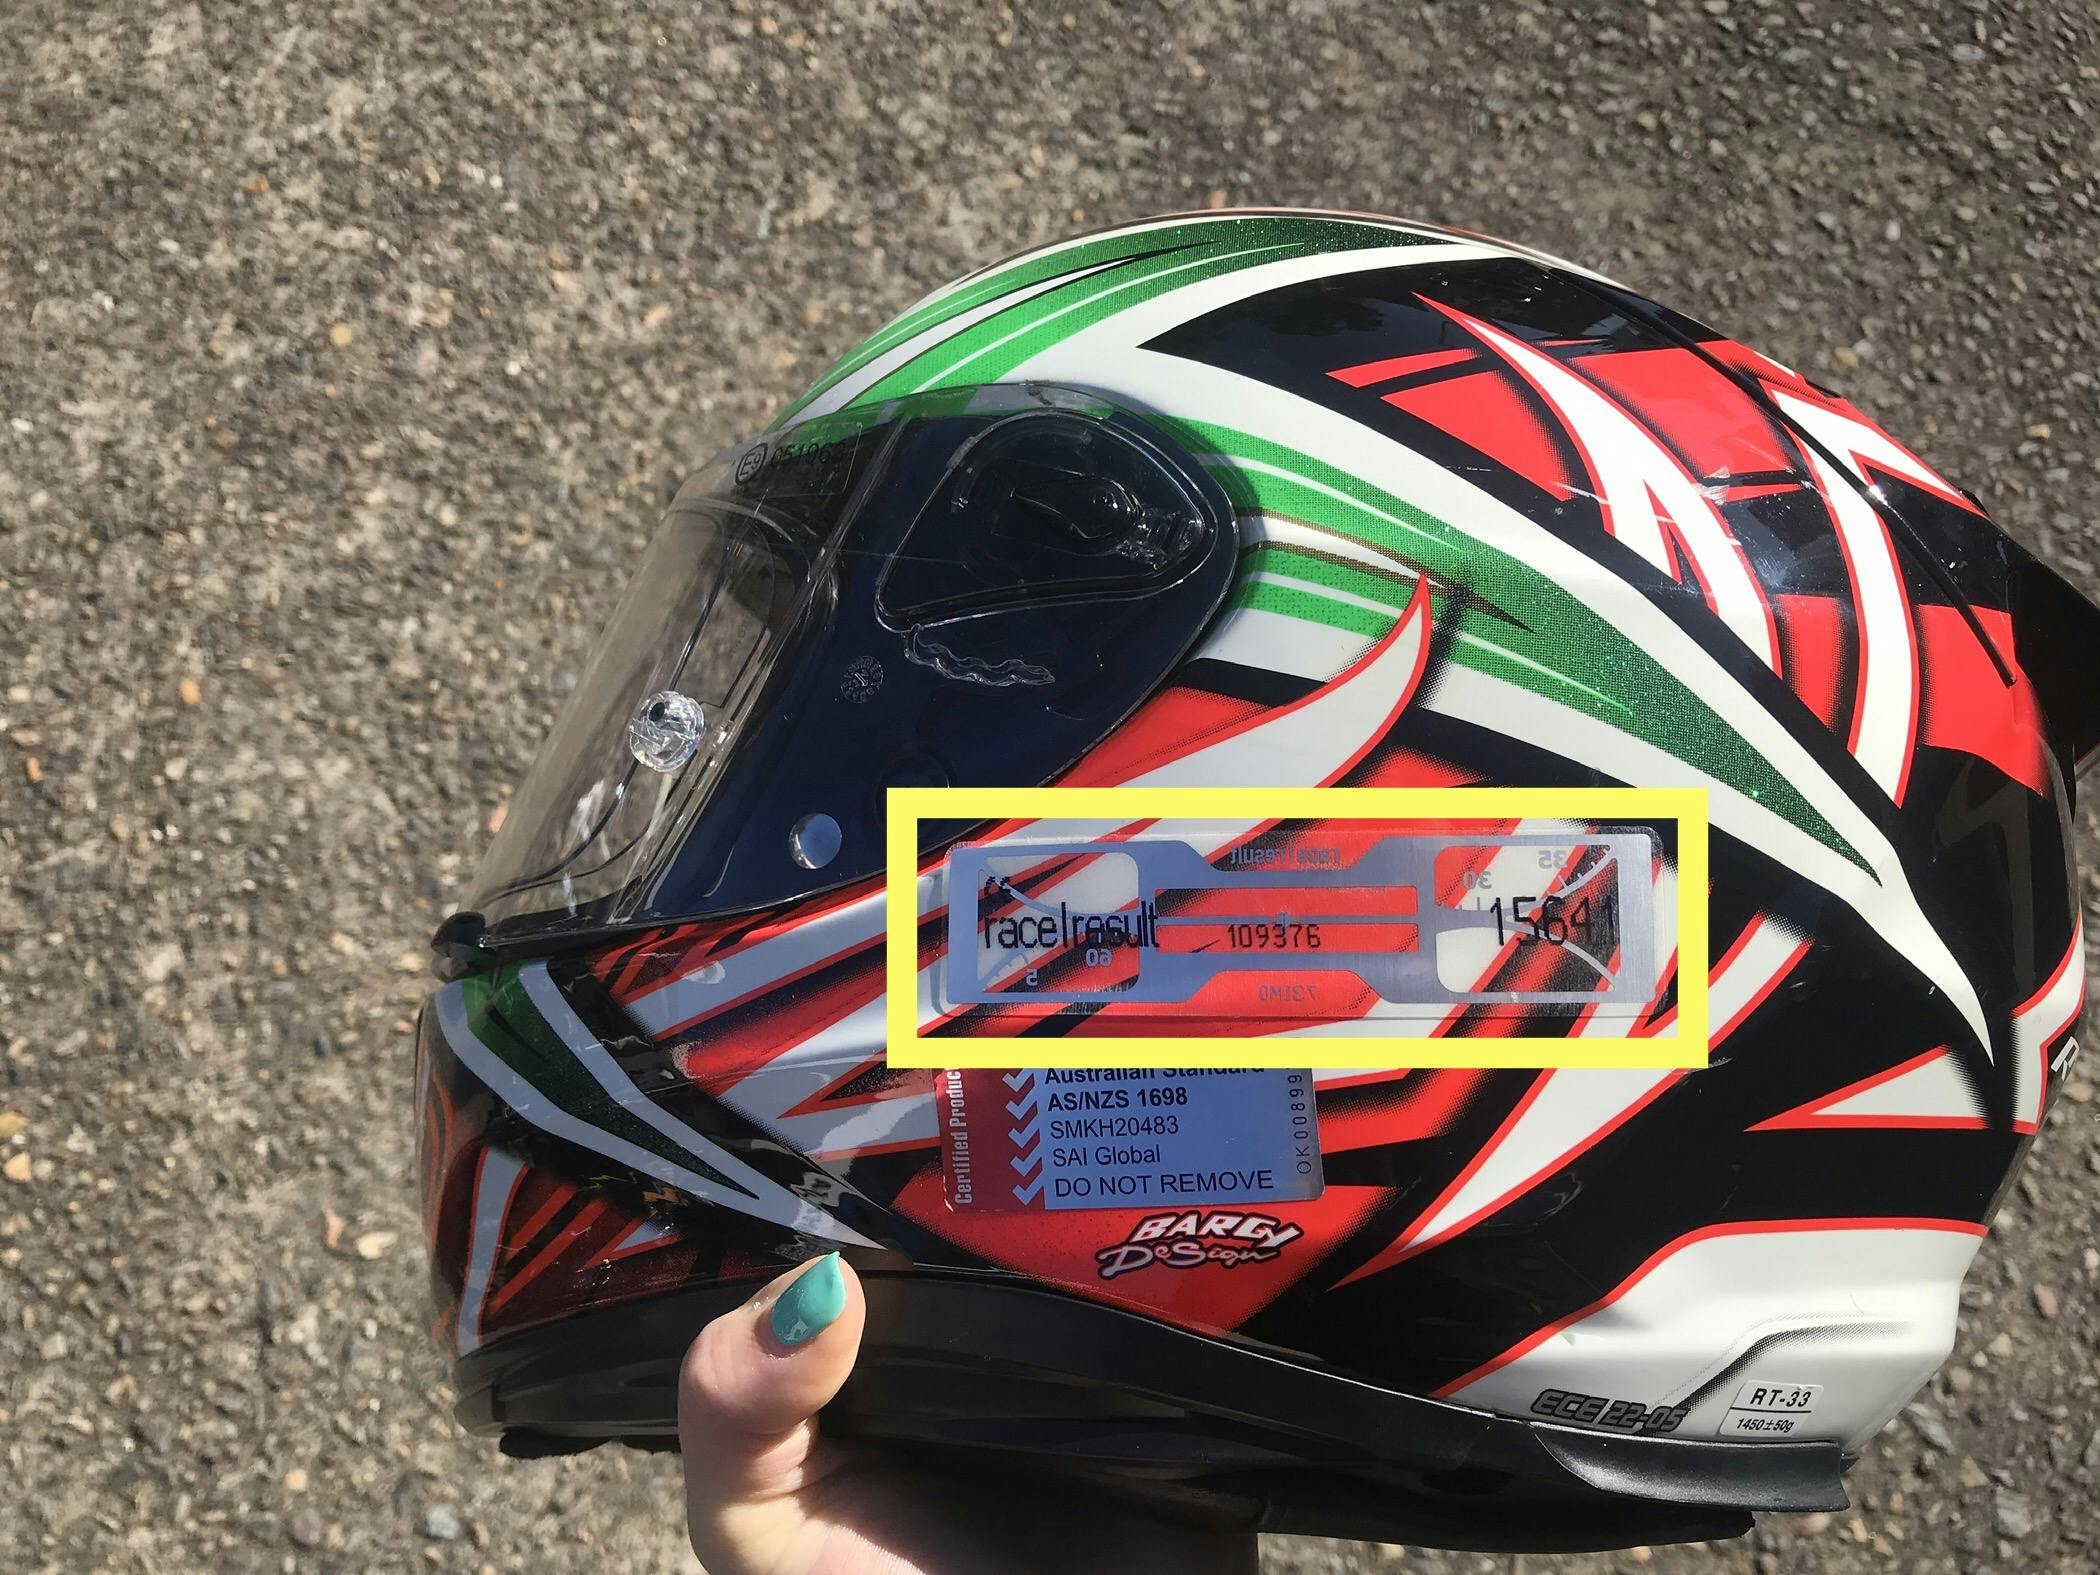 An orange and green Kabuto helmet with a SMSP time tracking sticker highlighted